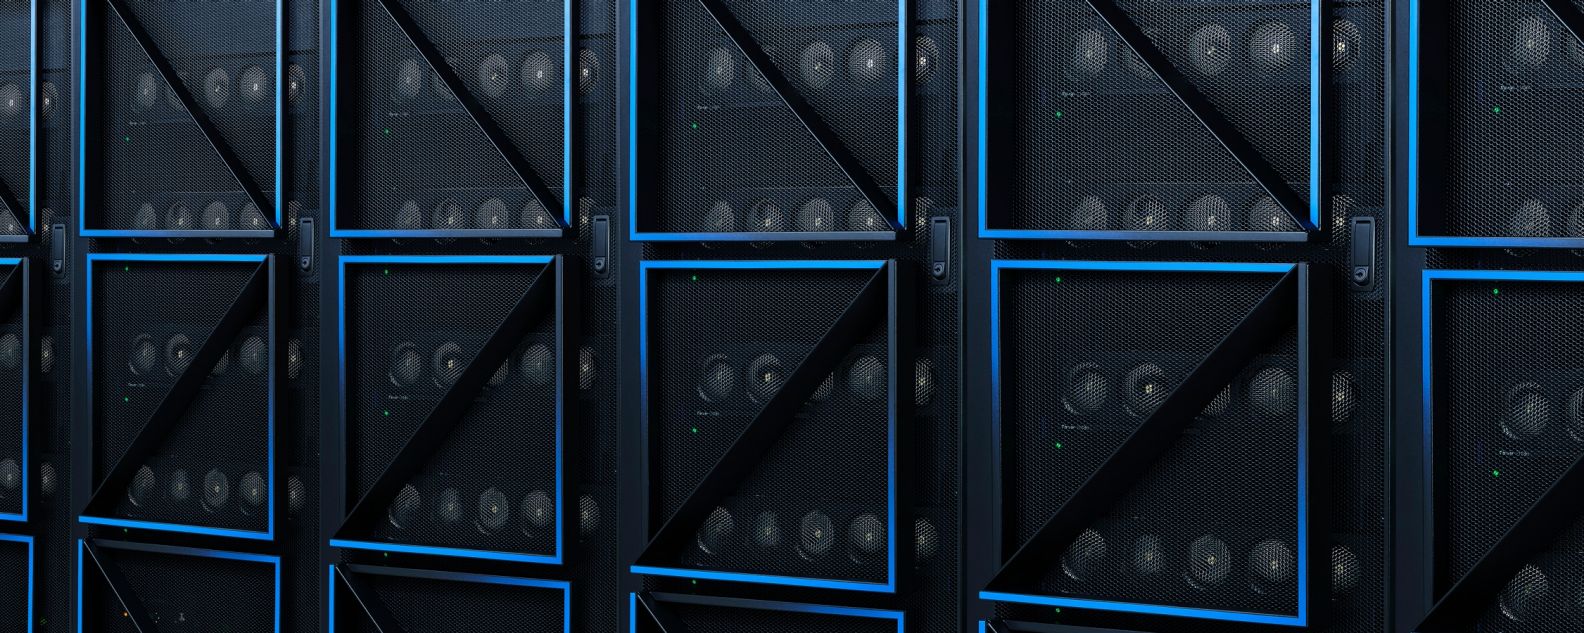 A row of computer server rack in a data center, featuring the IBM Power10 door design